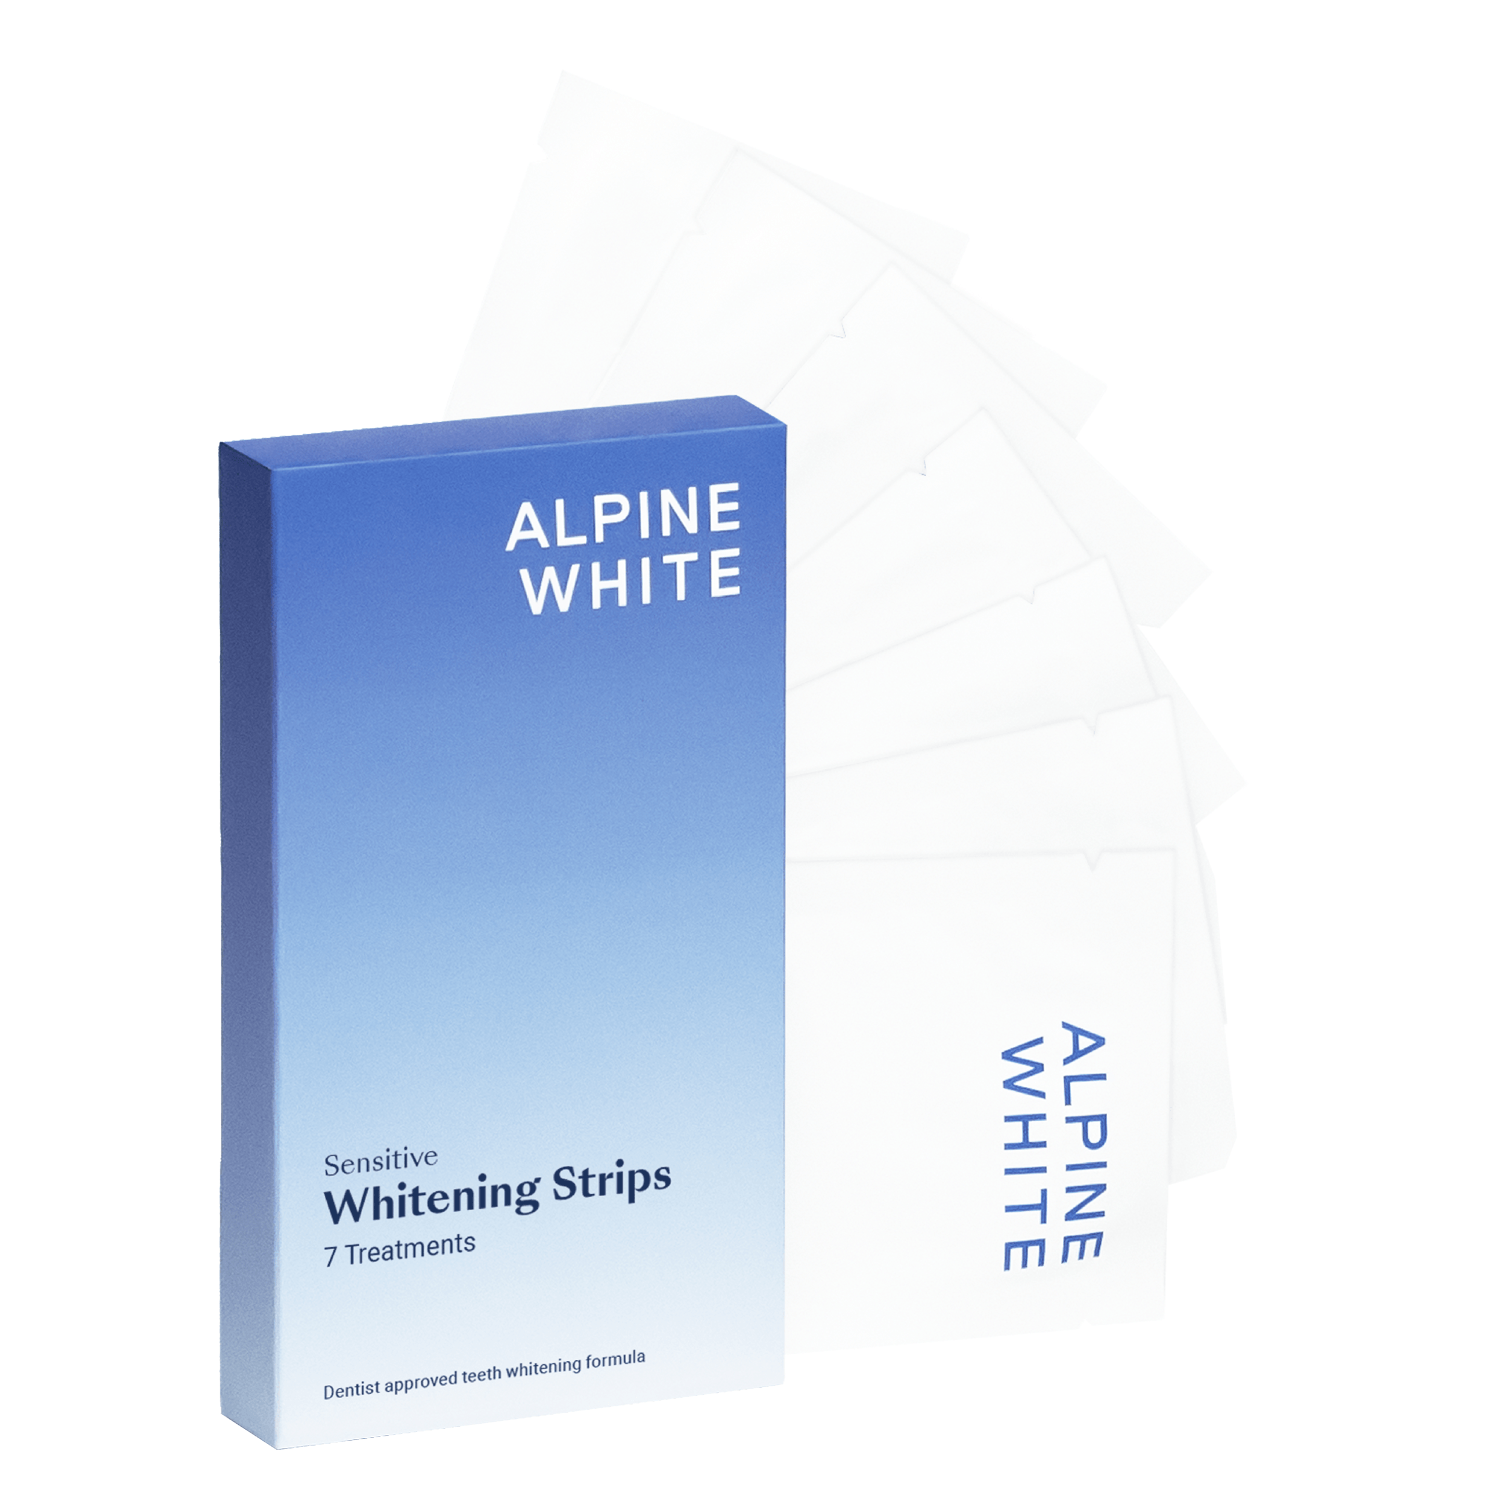 Product image from ALPINE WHITE - Whitening Strips Sensitive